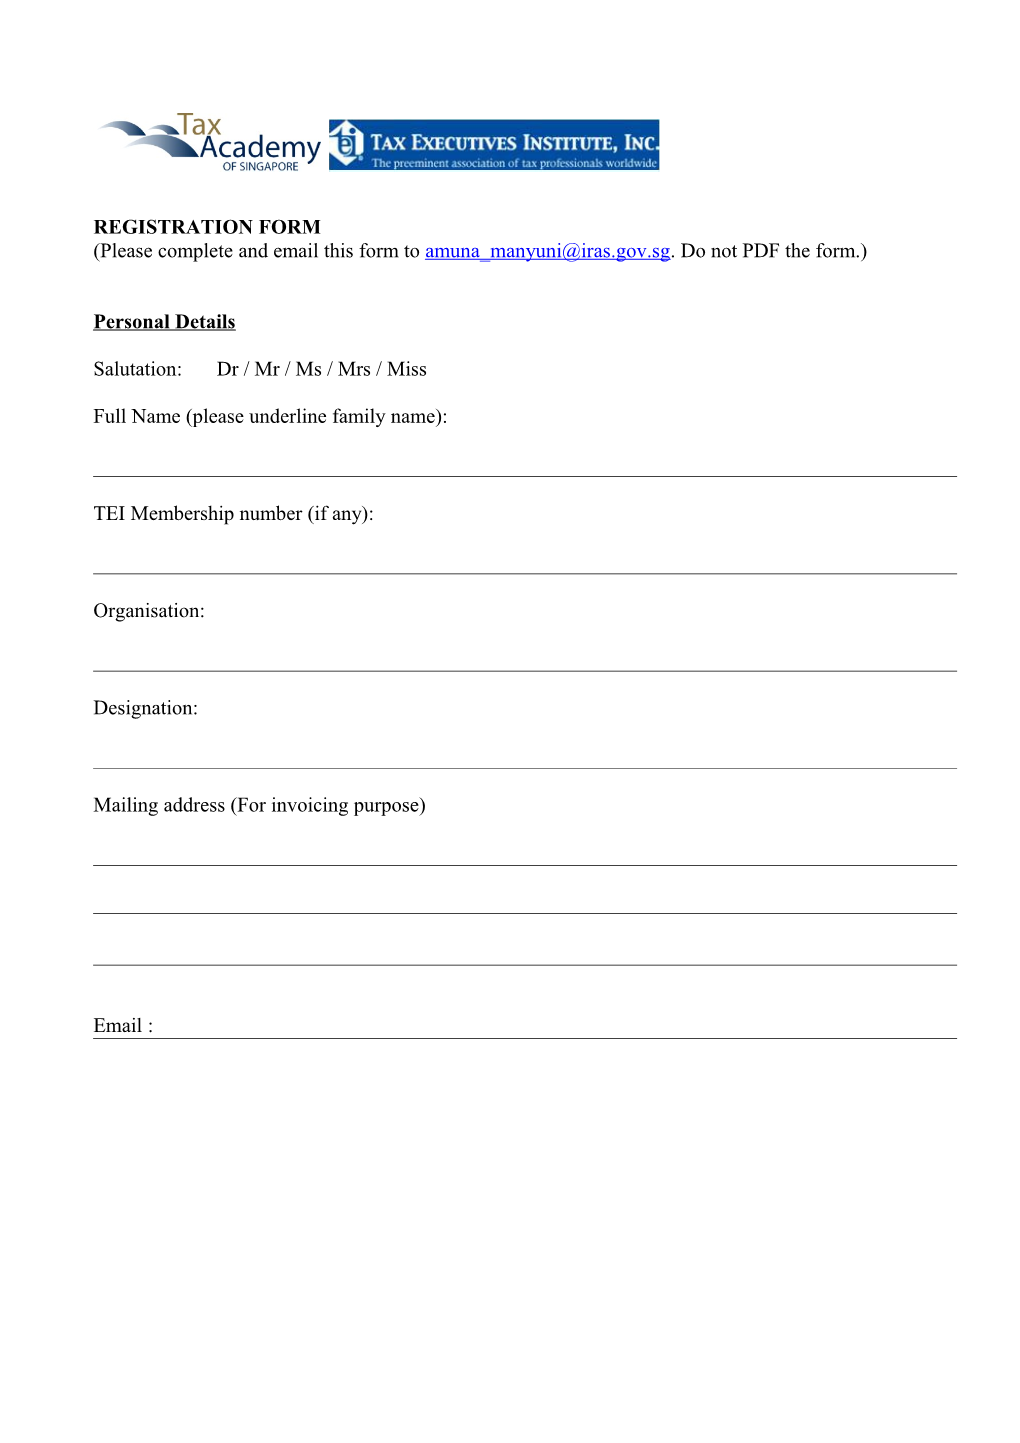 Please Complete and Email This Form to . Do Not PDF the Form.